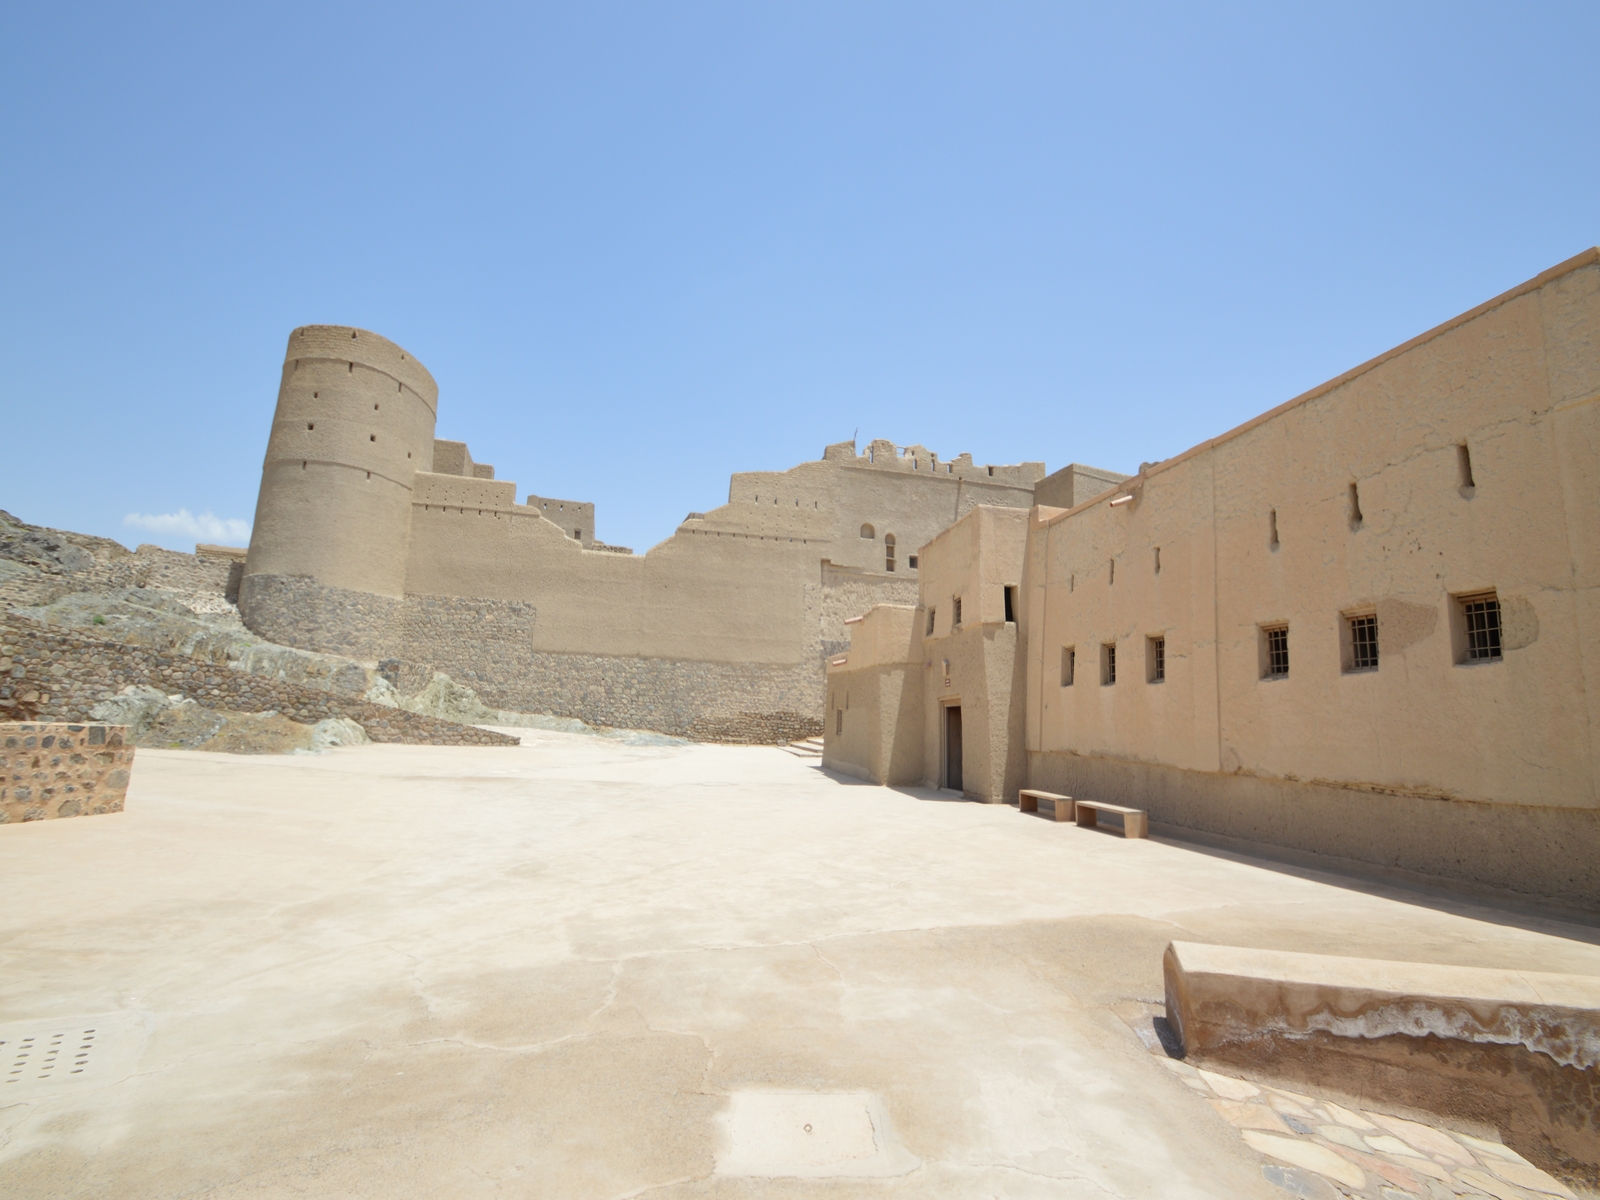 Bahla is probably the most established town in the Sultanate 11